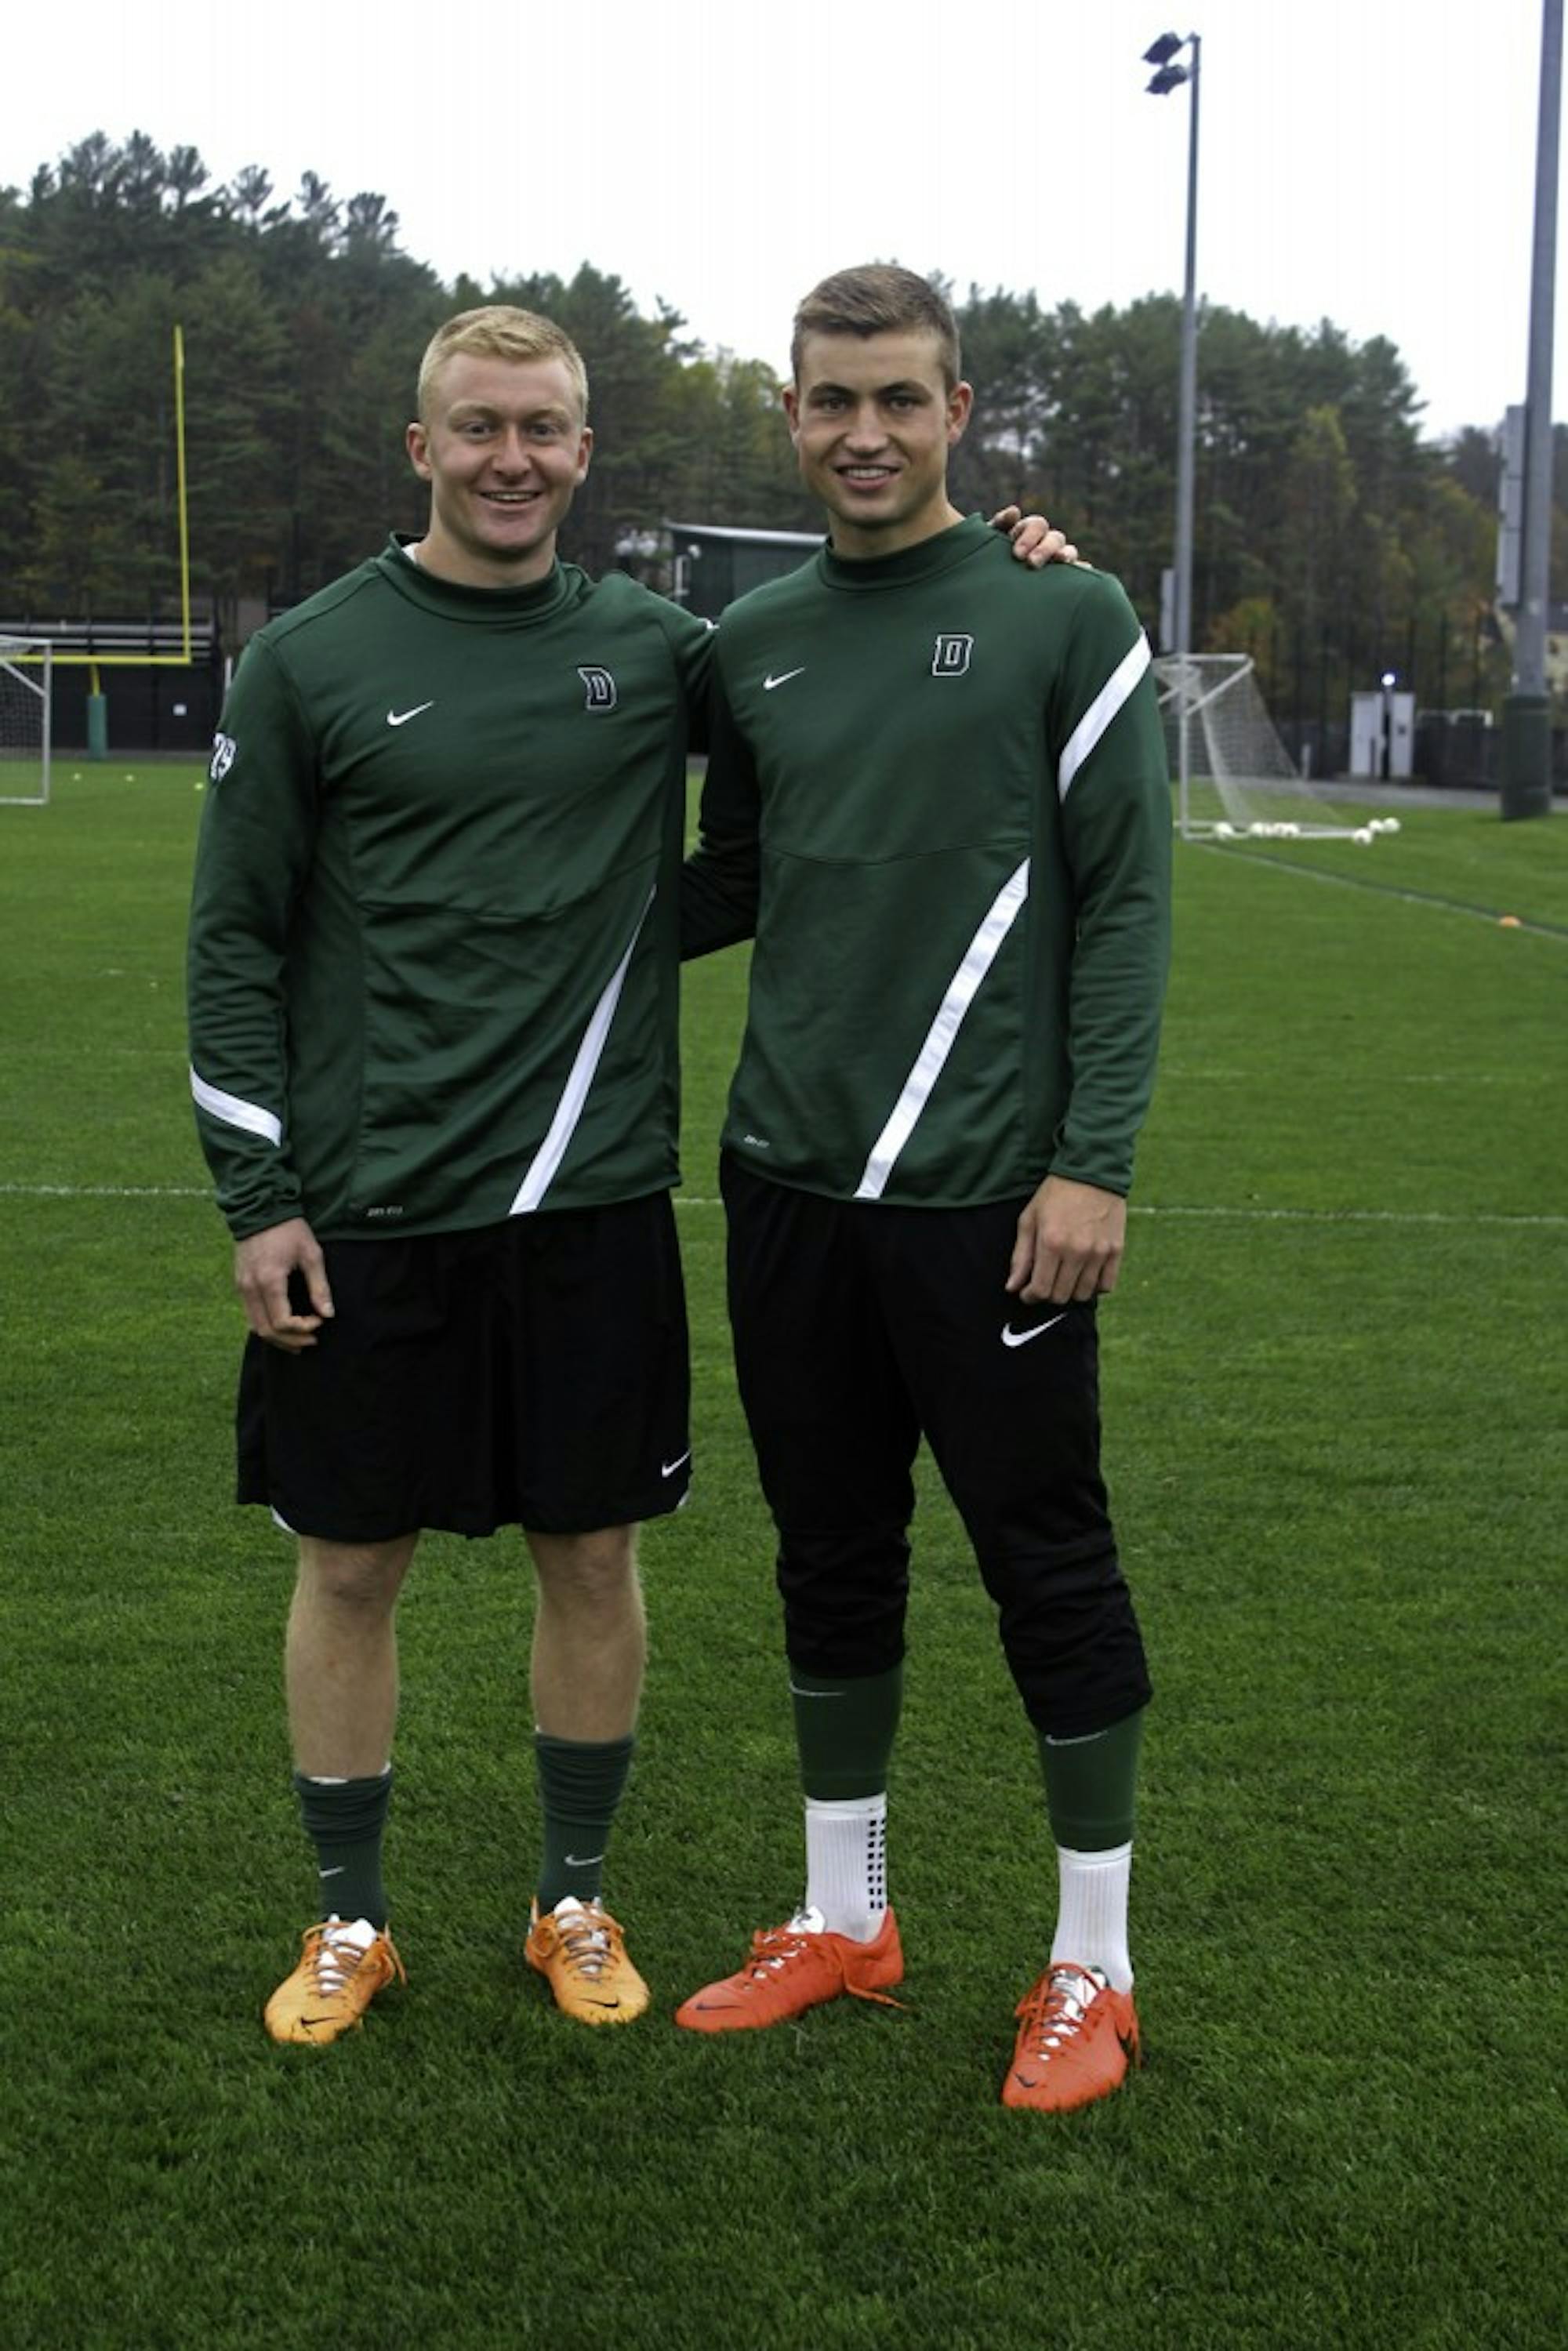 The Danilack brothers, Hugh ’15 and Matt ’18, are keys to the soccer team’s success.